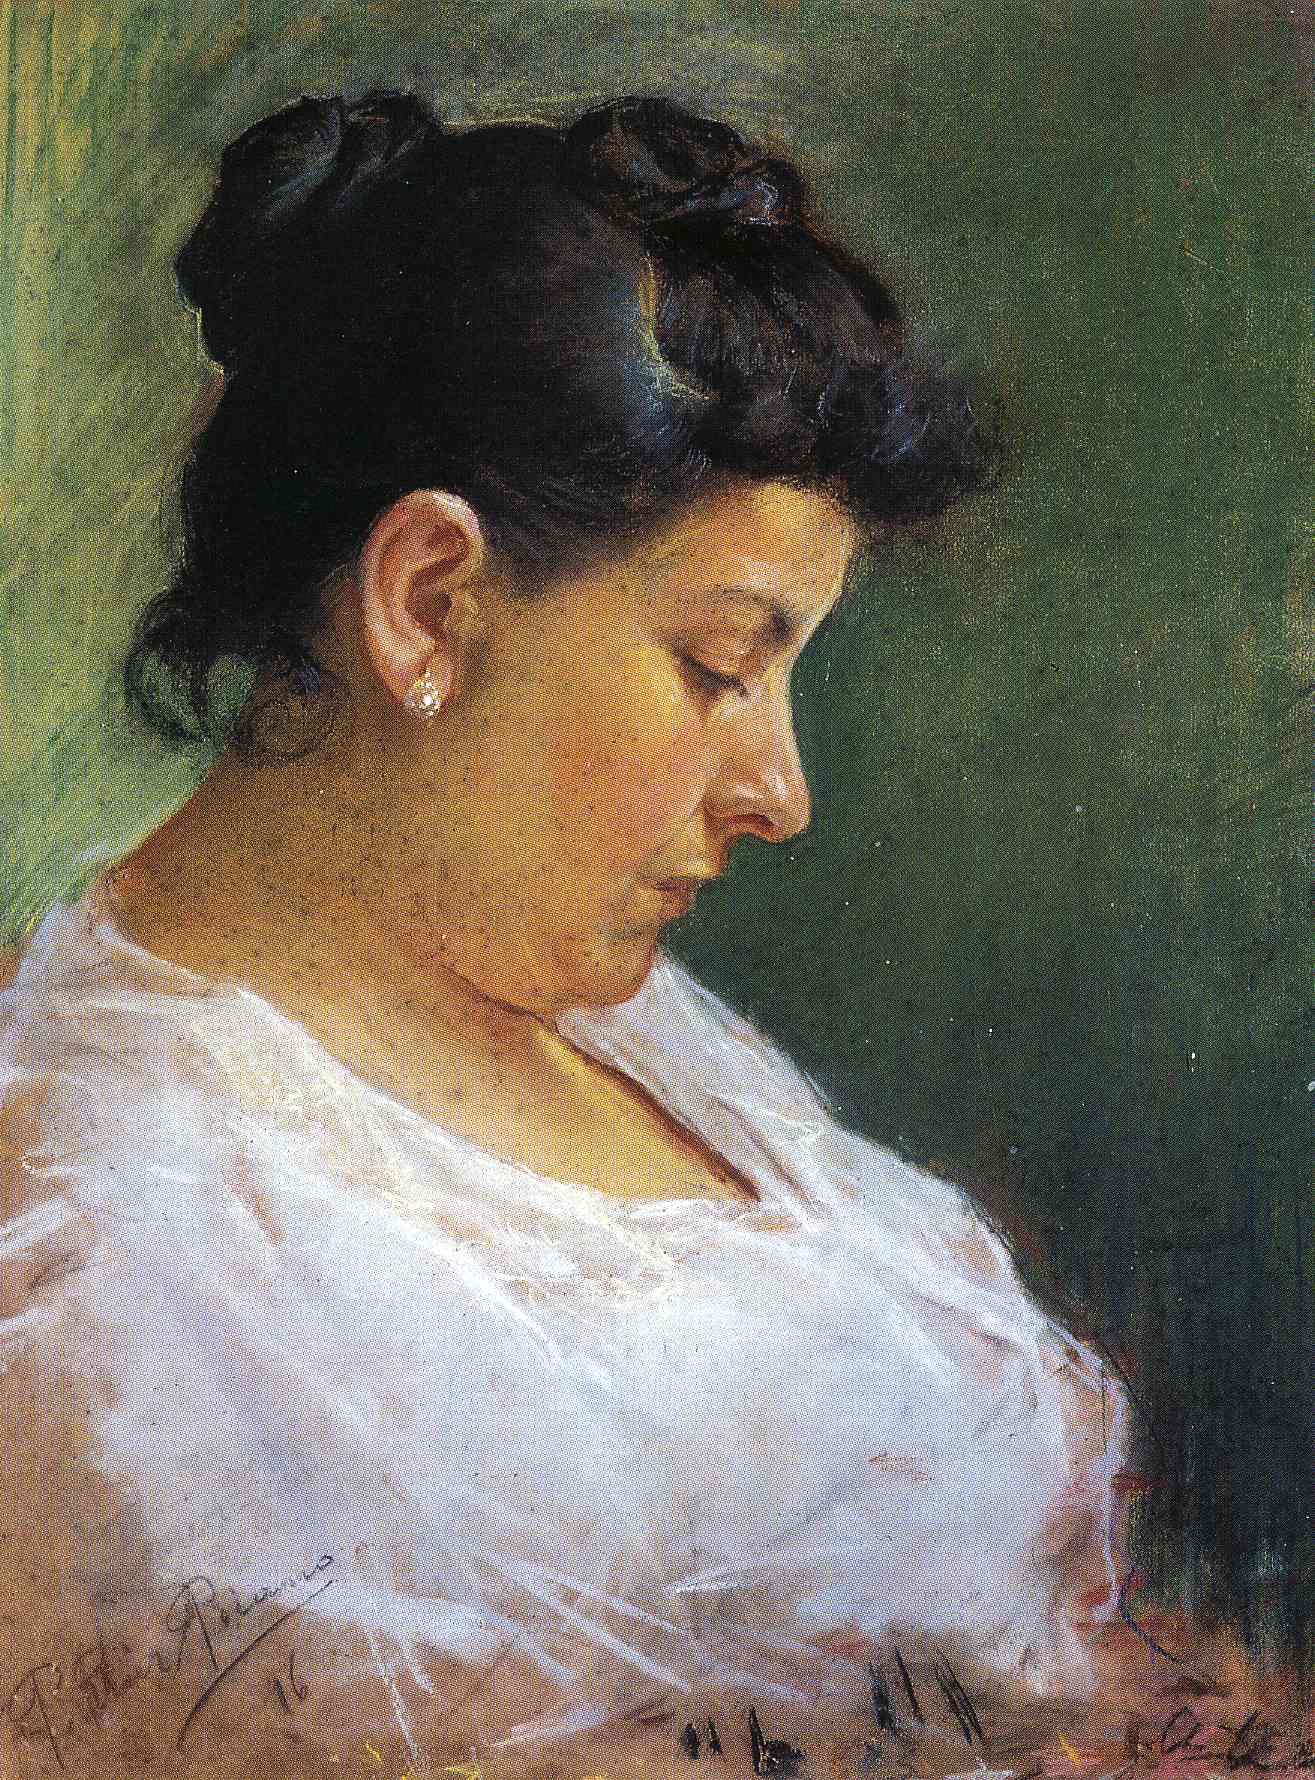 Portrait of the Artist's Mother, 1896 - Pablo Picasso - WikiArt.org